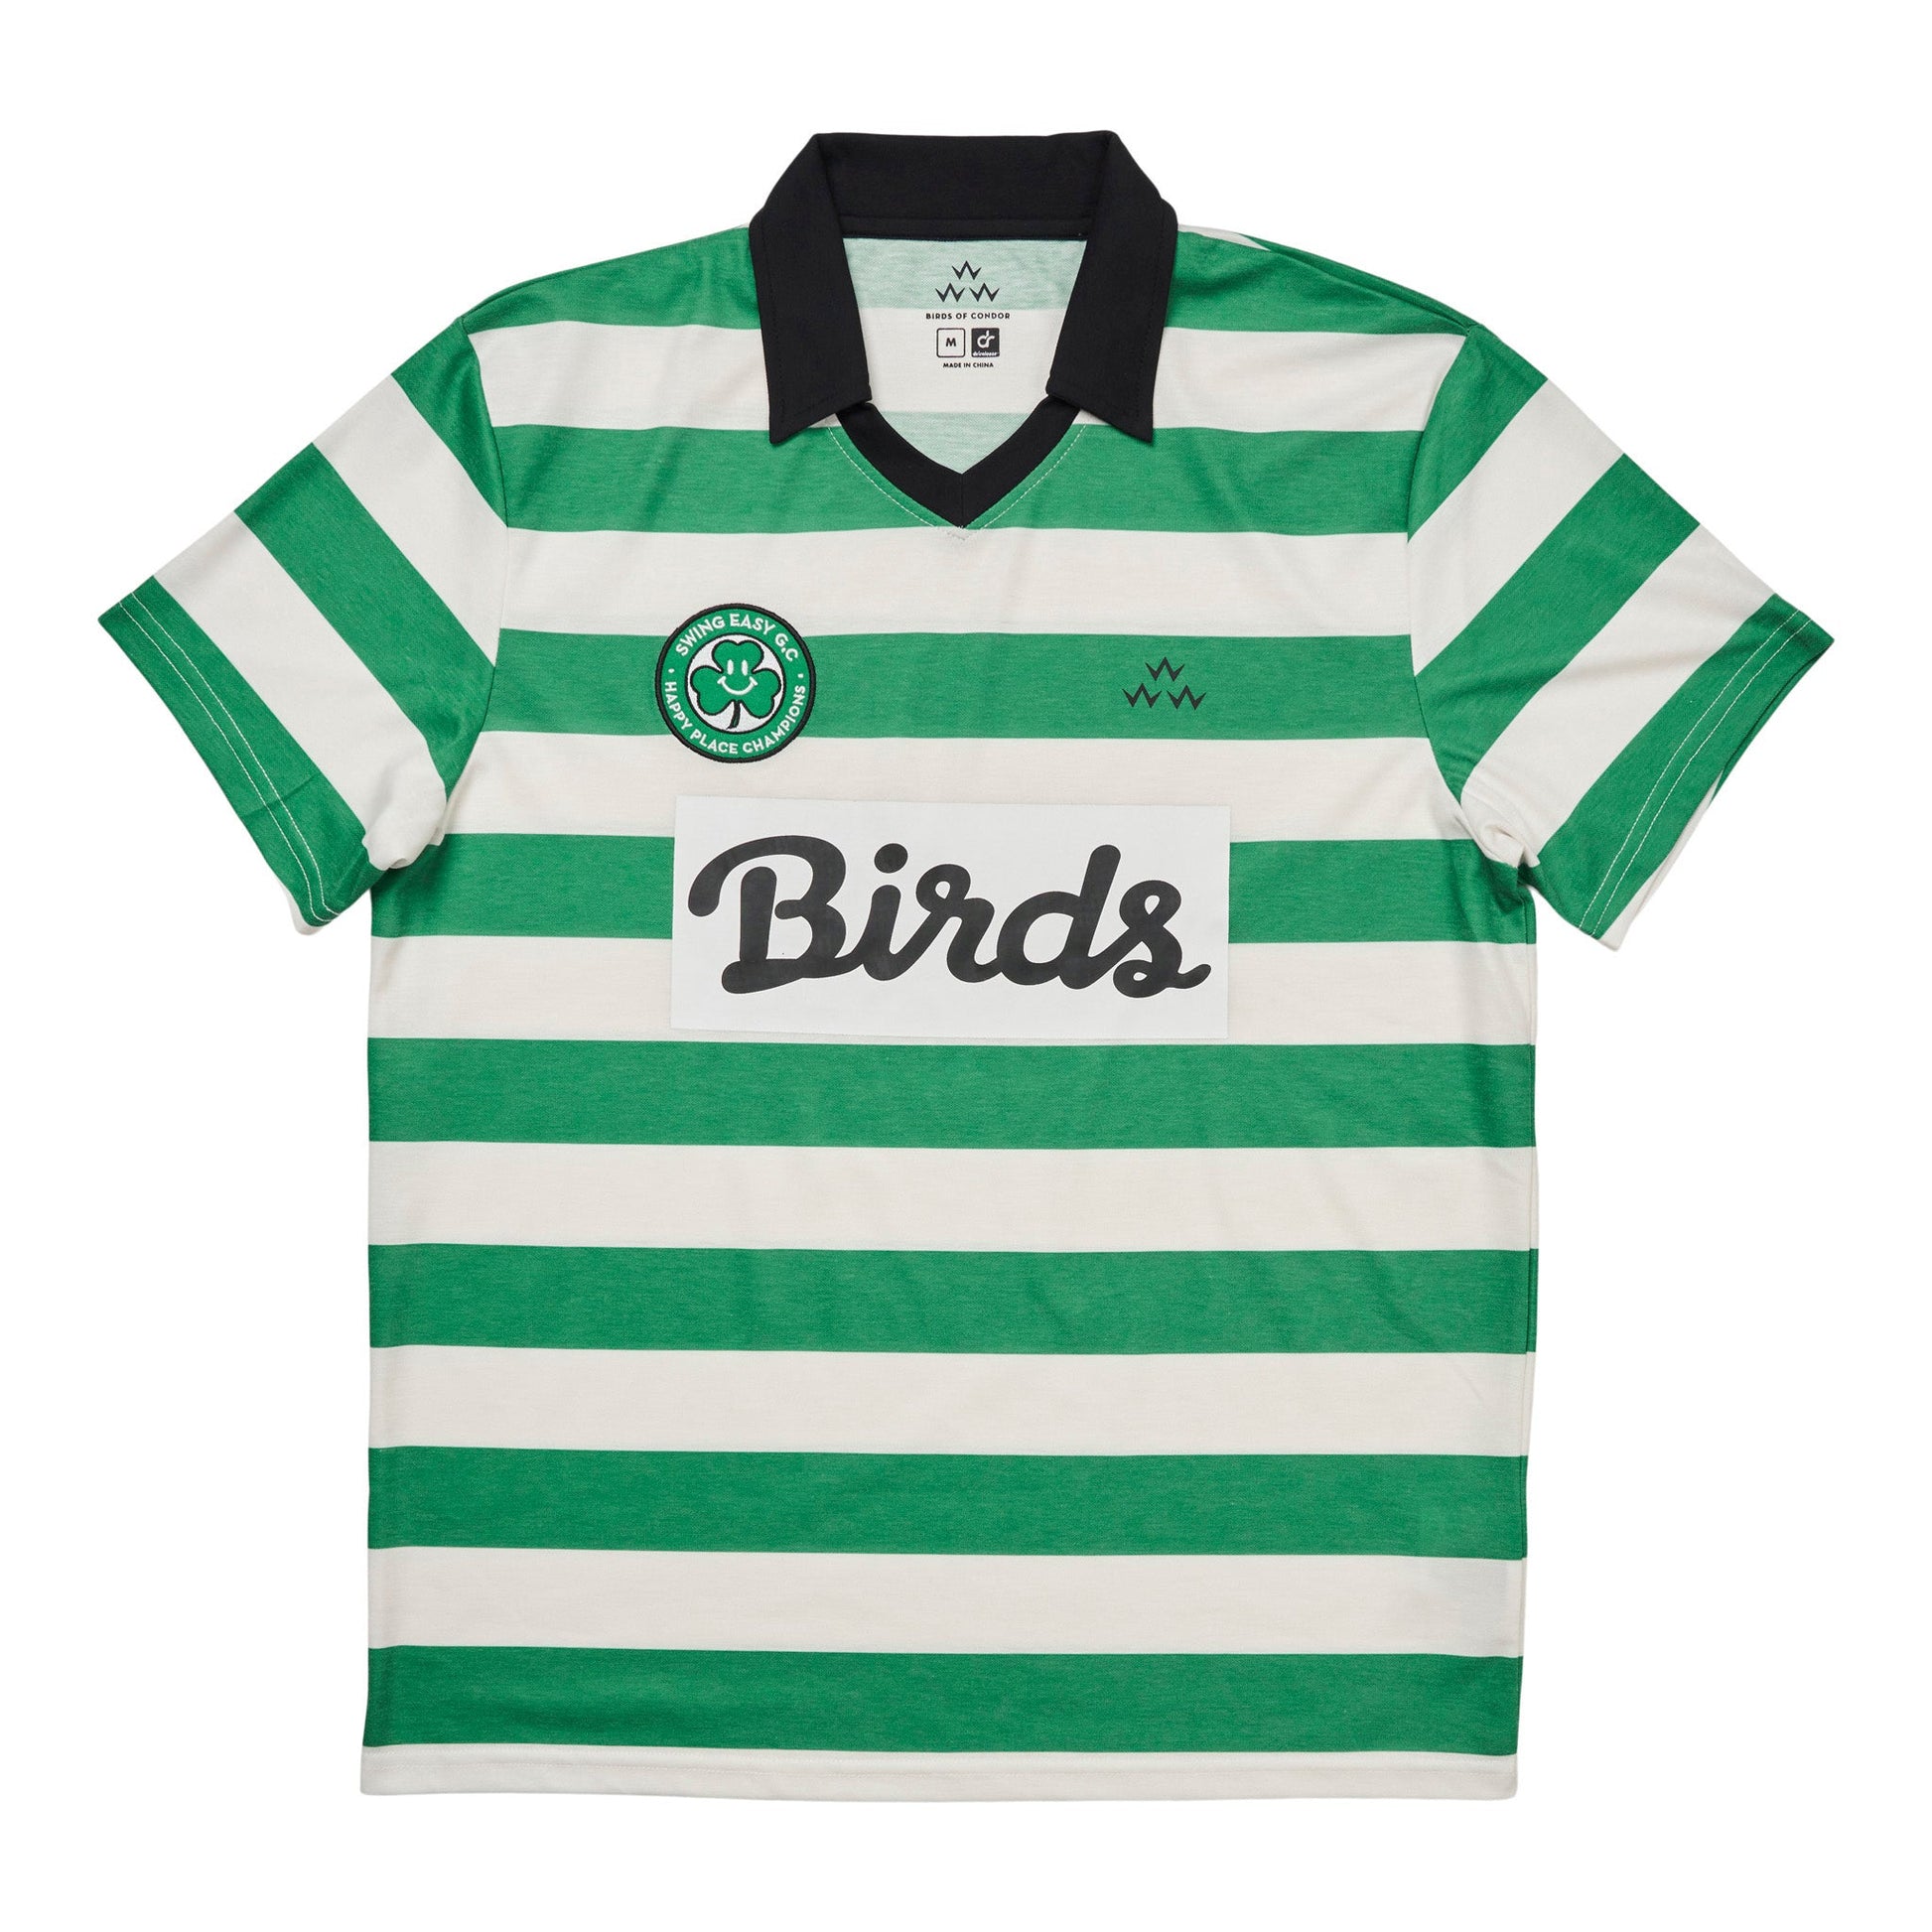 birds-of-condor-green-white-stripes-swing-easy-golf-club-happy-place-champions-fifa-world-cup-football-golf-polo-shirt-front